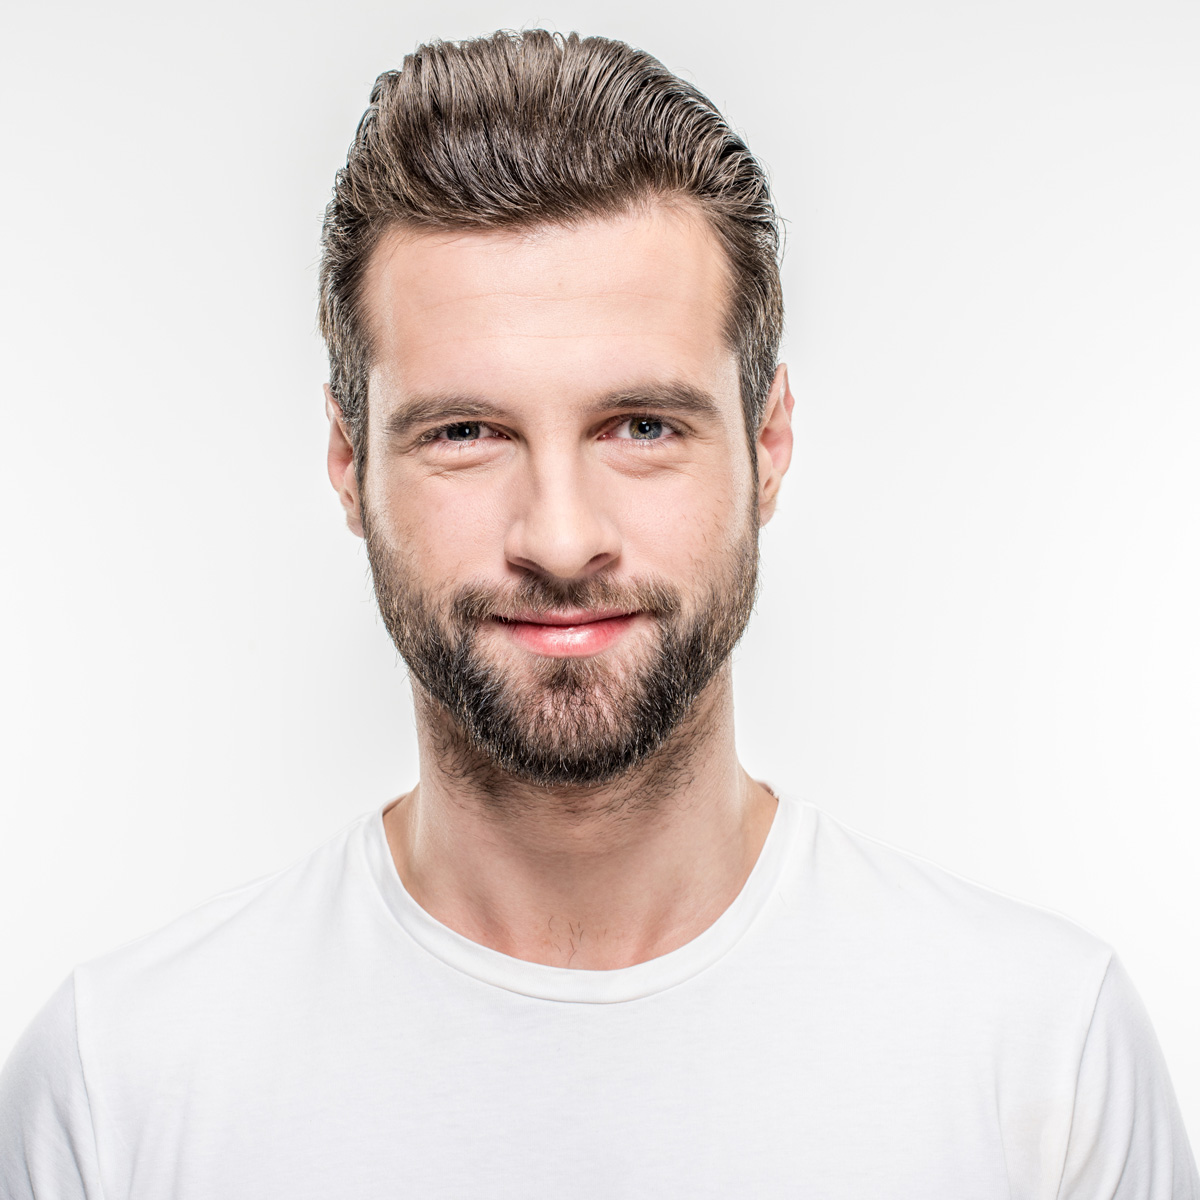 HCG Injections for Men Near Me in Dallas, TX